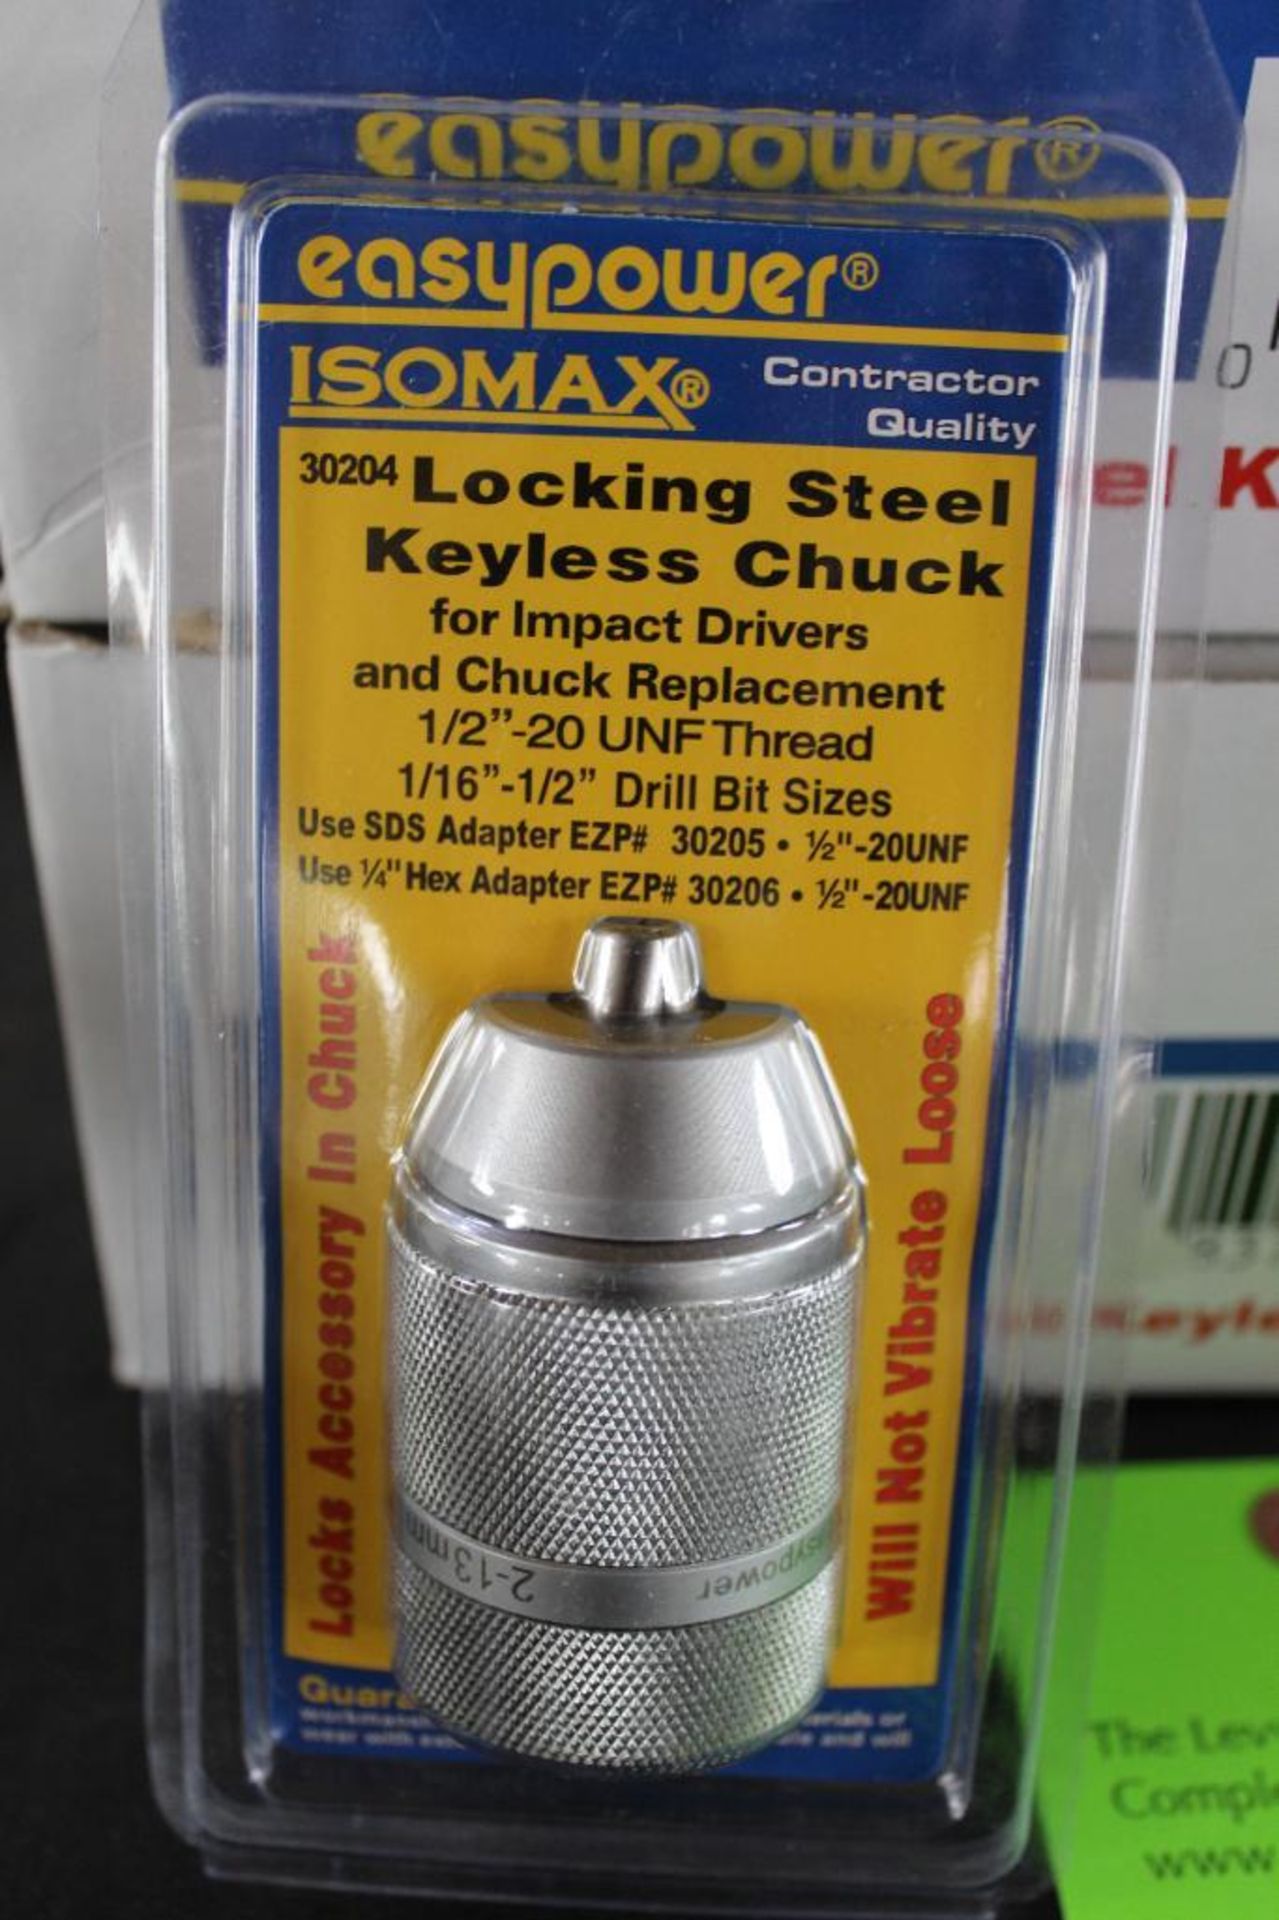 Lot of(6) Boxes of (6 each) Easy Power Isomax Locking Steel Keyless Chuck 30204 - Image 3 of 6